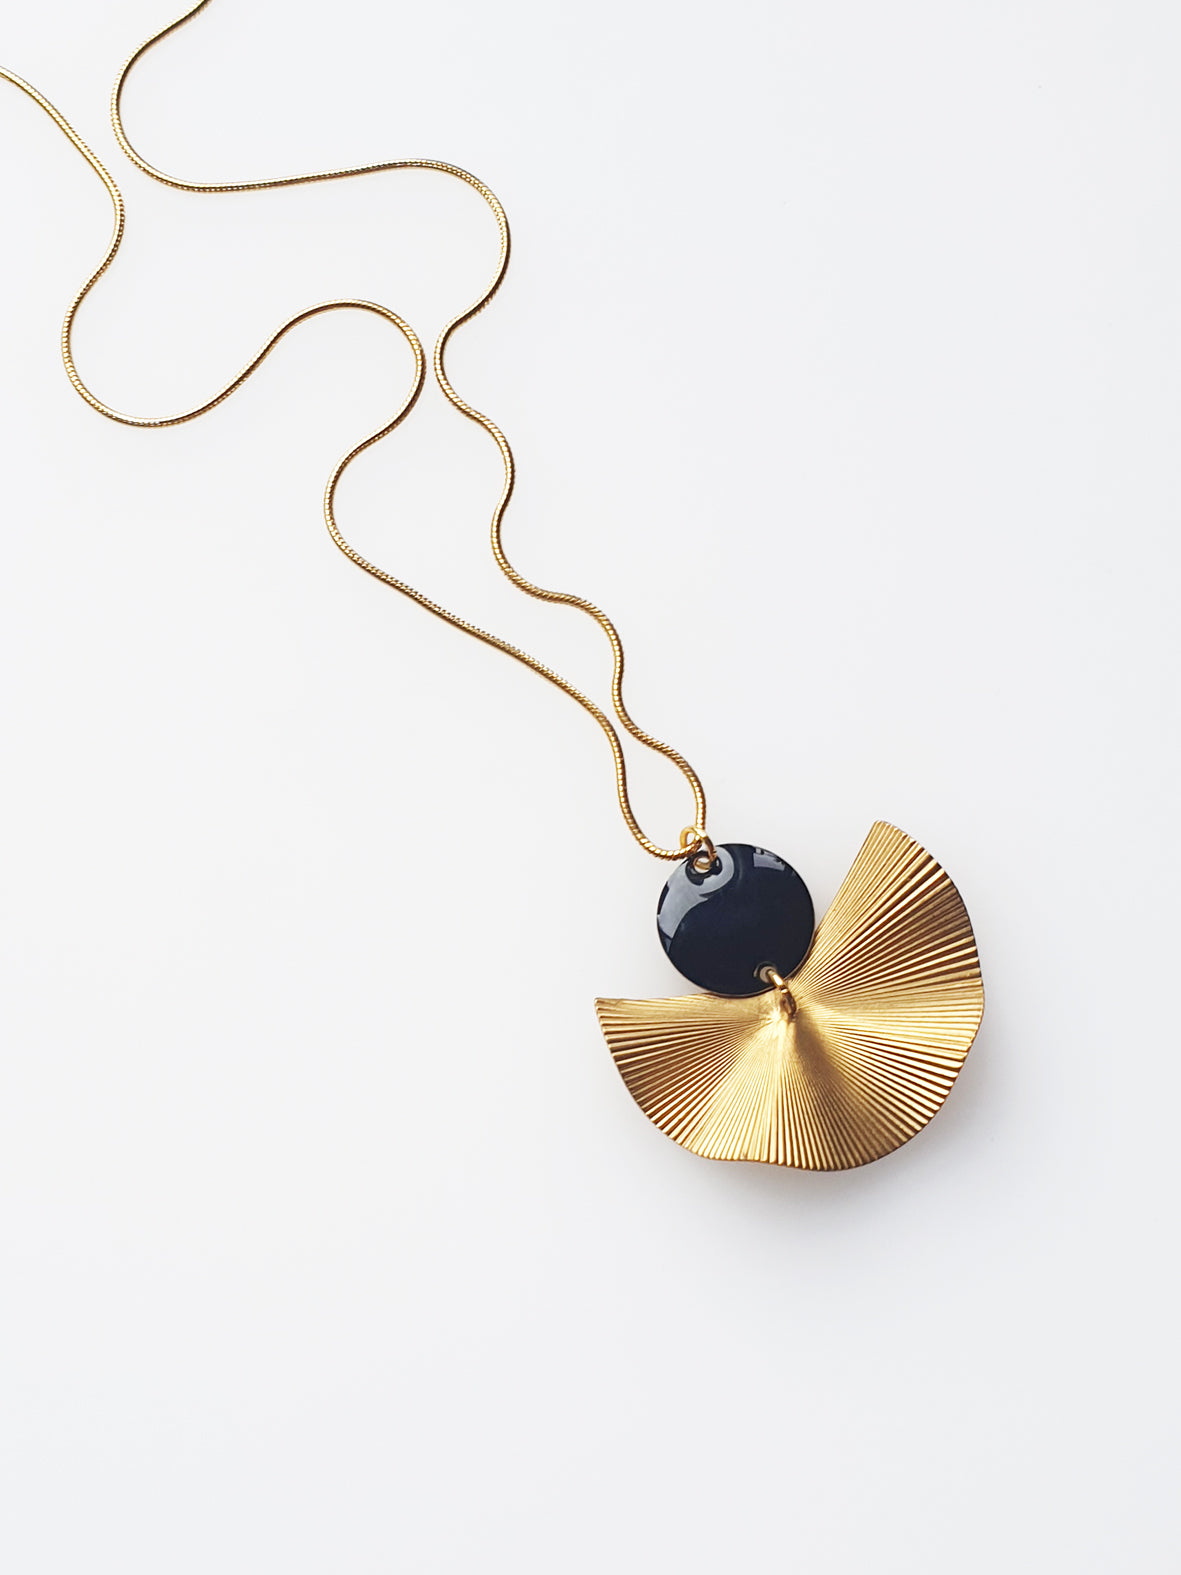 A necklace sits against a white background. It features a gold chain, a black enamel connector dot and a textured brass fan piece.